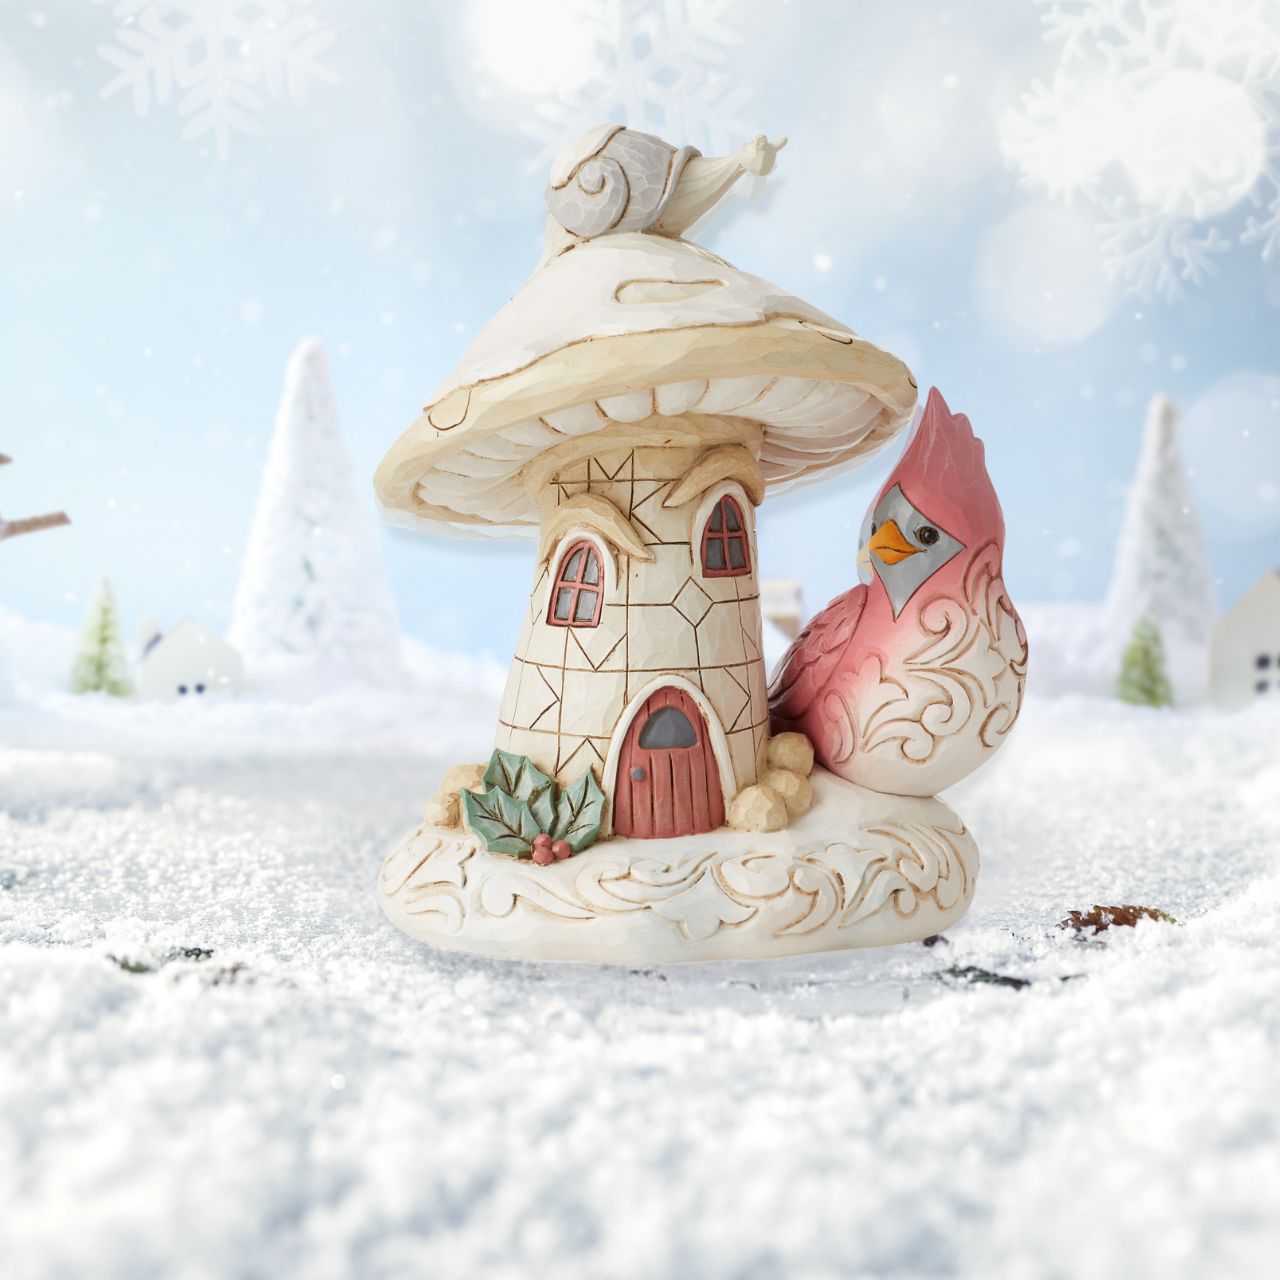 Woodland Mushroom House with Cardinal Figurine by Jim Shore  "Home For the Holidays" Designed in the iconic style of Jim Shore. This mushroom house is inhabited by woodland creatures ready to settle down in comfort for the festive season. Hand painted in high quality cast stone.